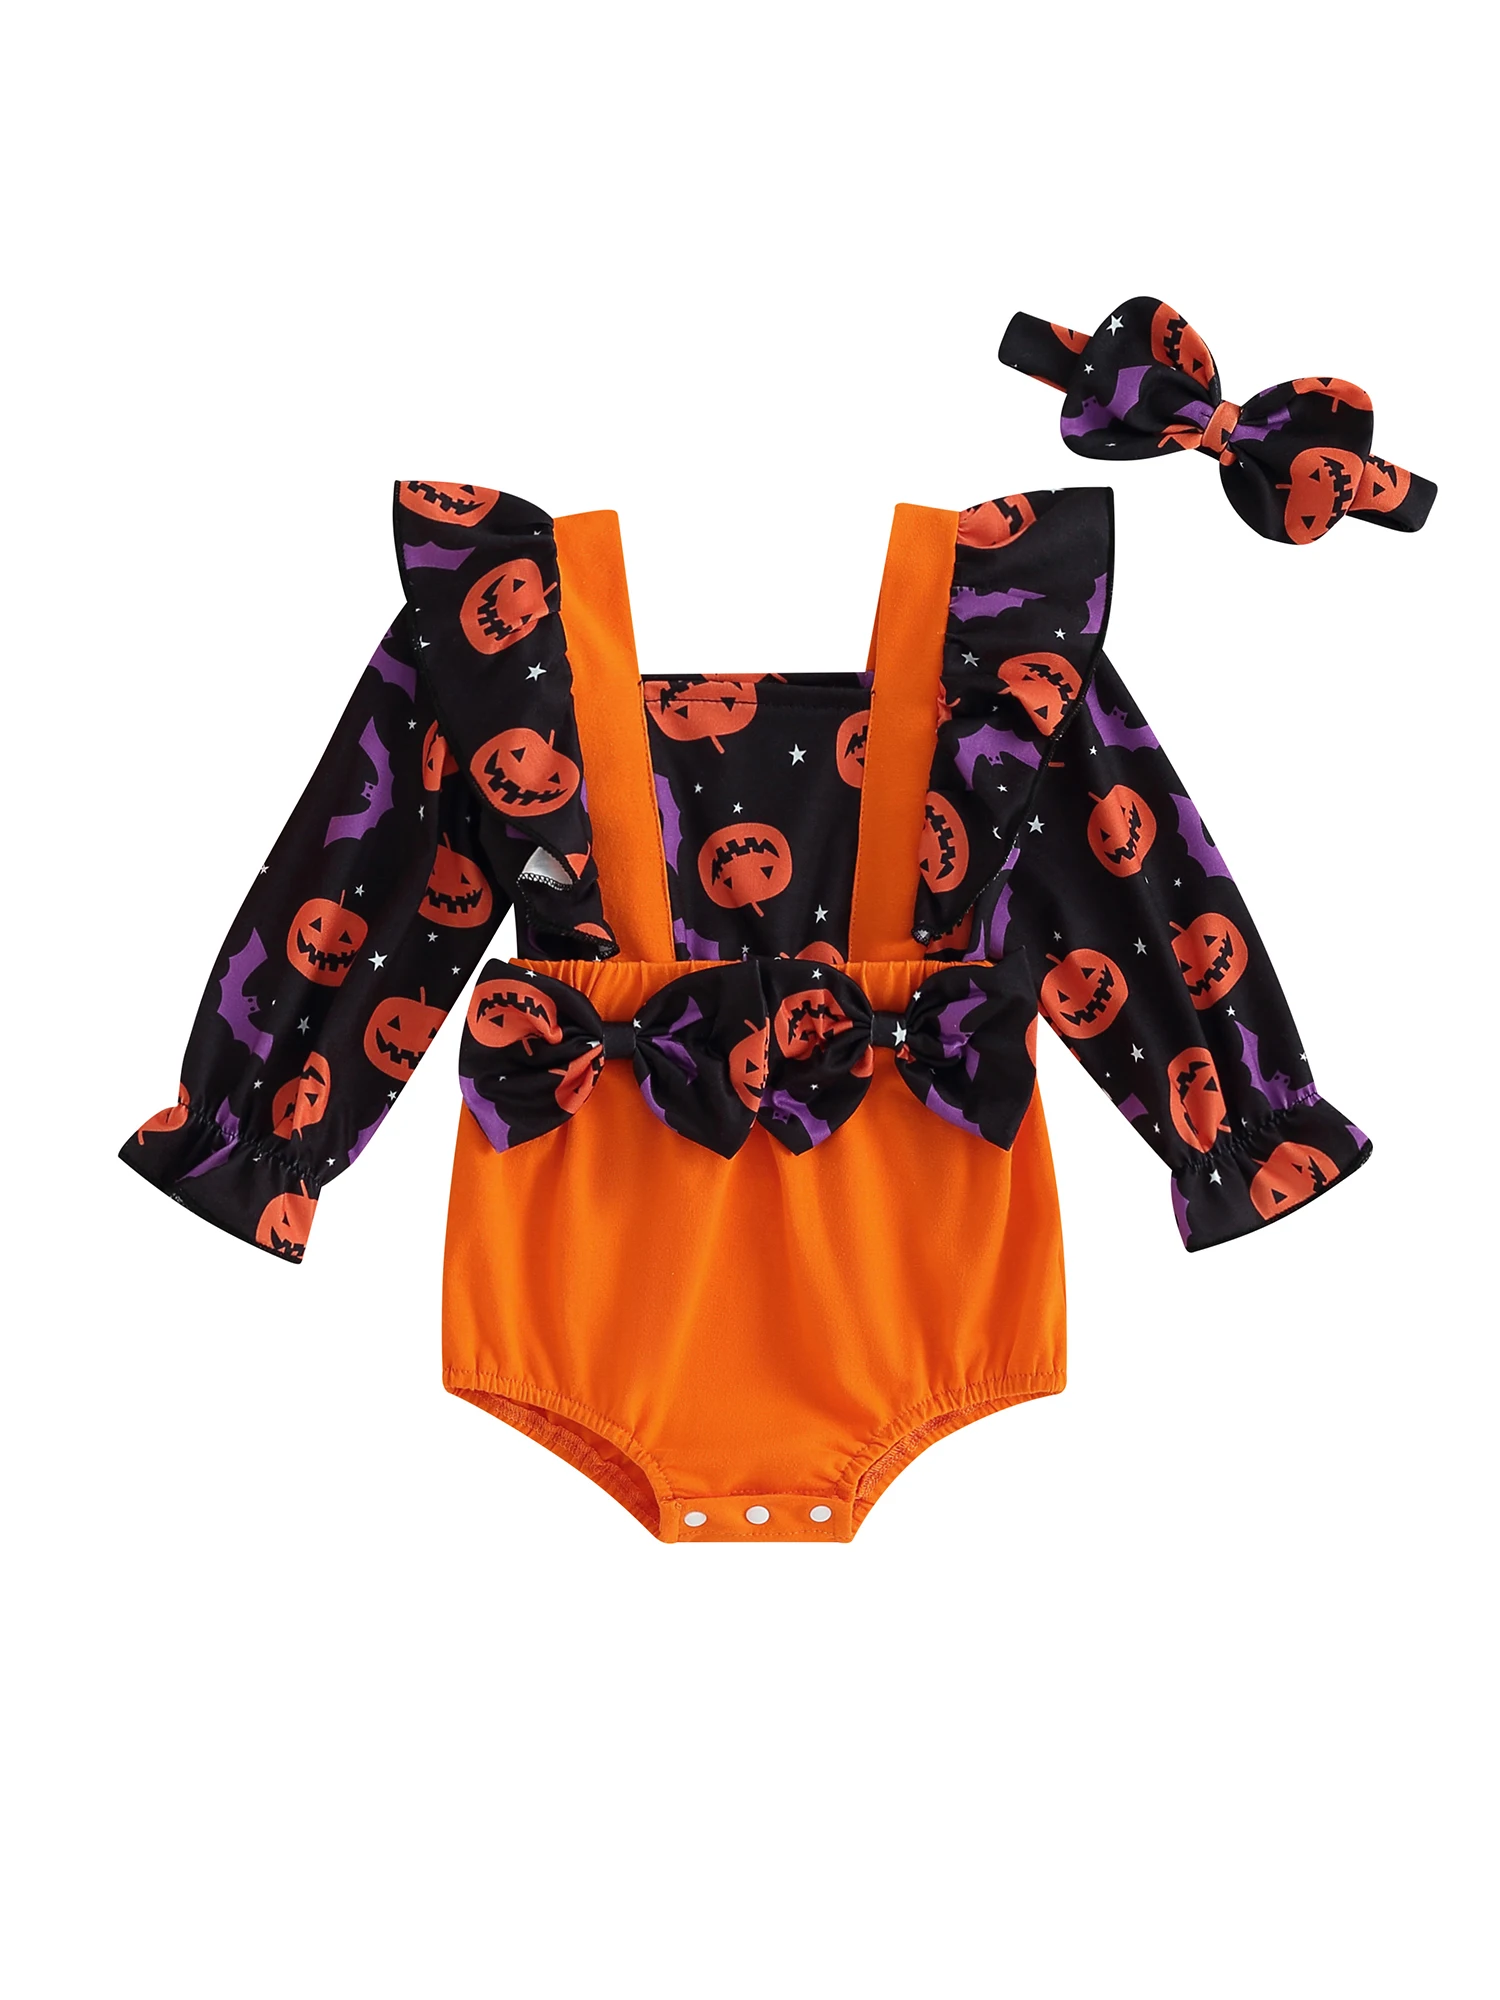 

Baby Boys Ghost Print Romper Long Sleeve Round Collar Ruffle Infant Halloween Jumpsuit with Hat